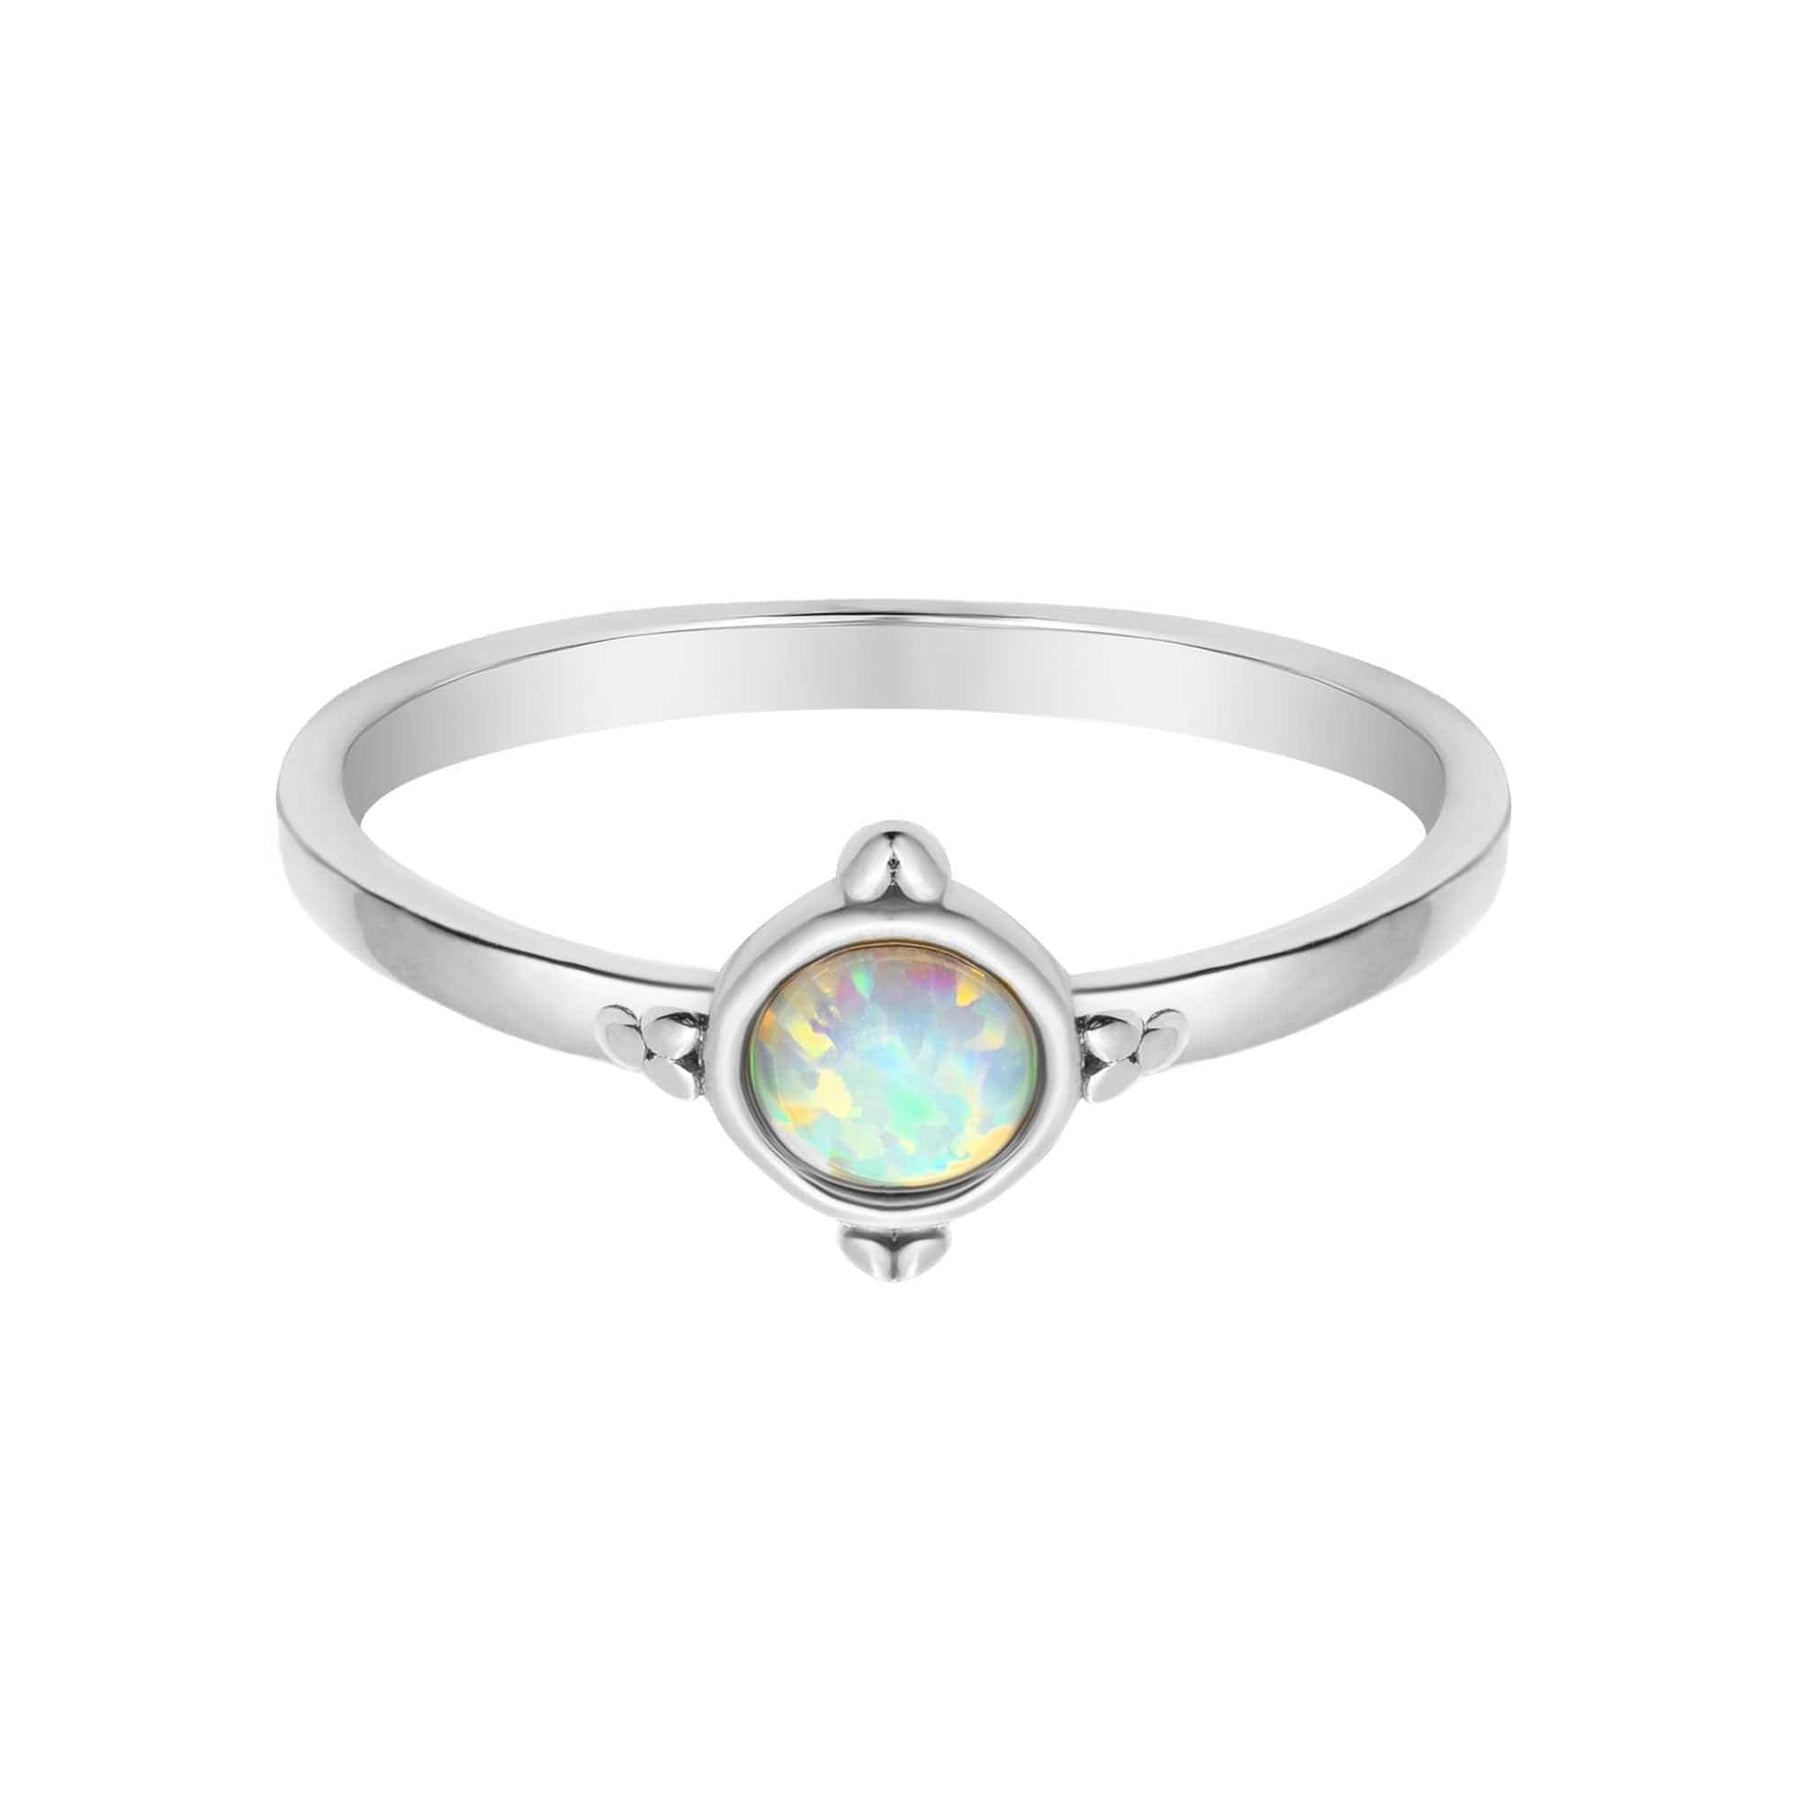 BohoMoon Stainless Steel Aubrey Opal Ring Silver / US 6 / UK L / EUR 51 (small)